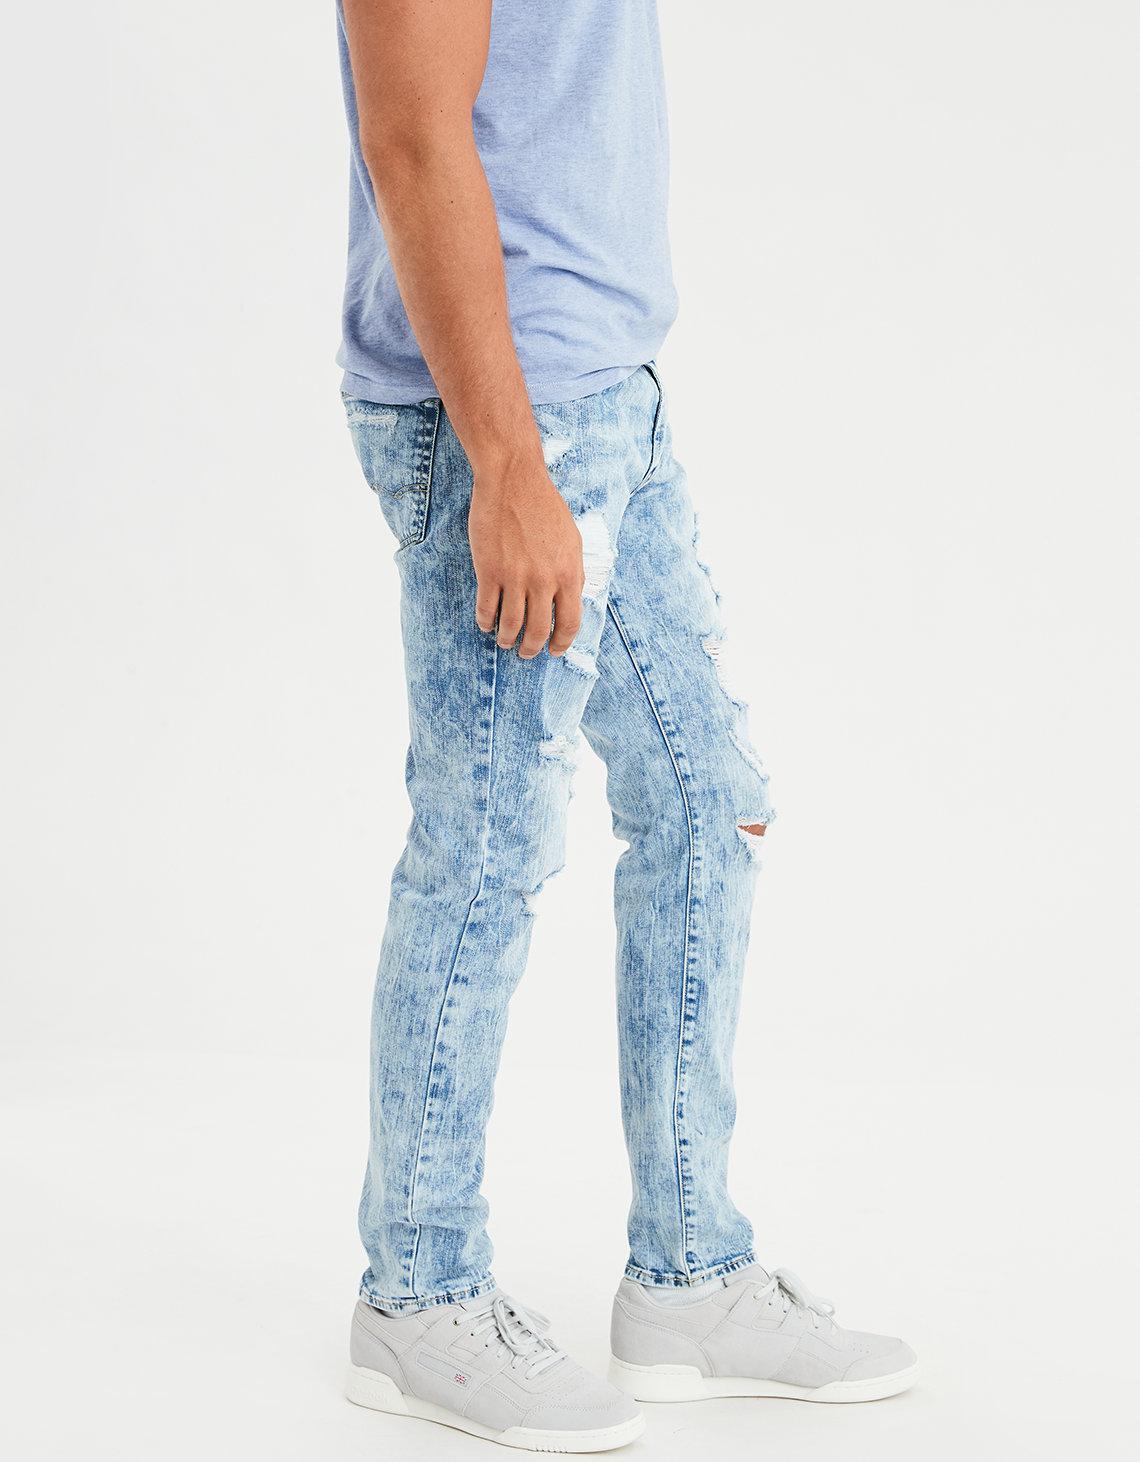 american eagle ripped jeans mens